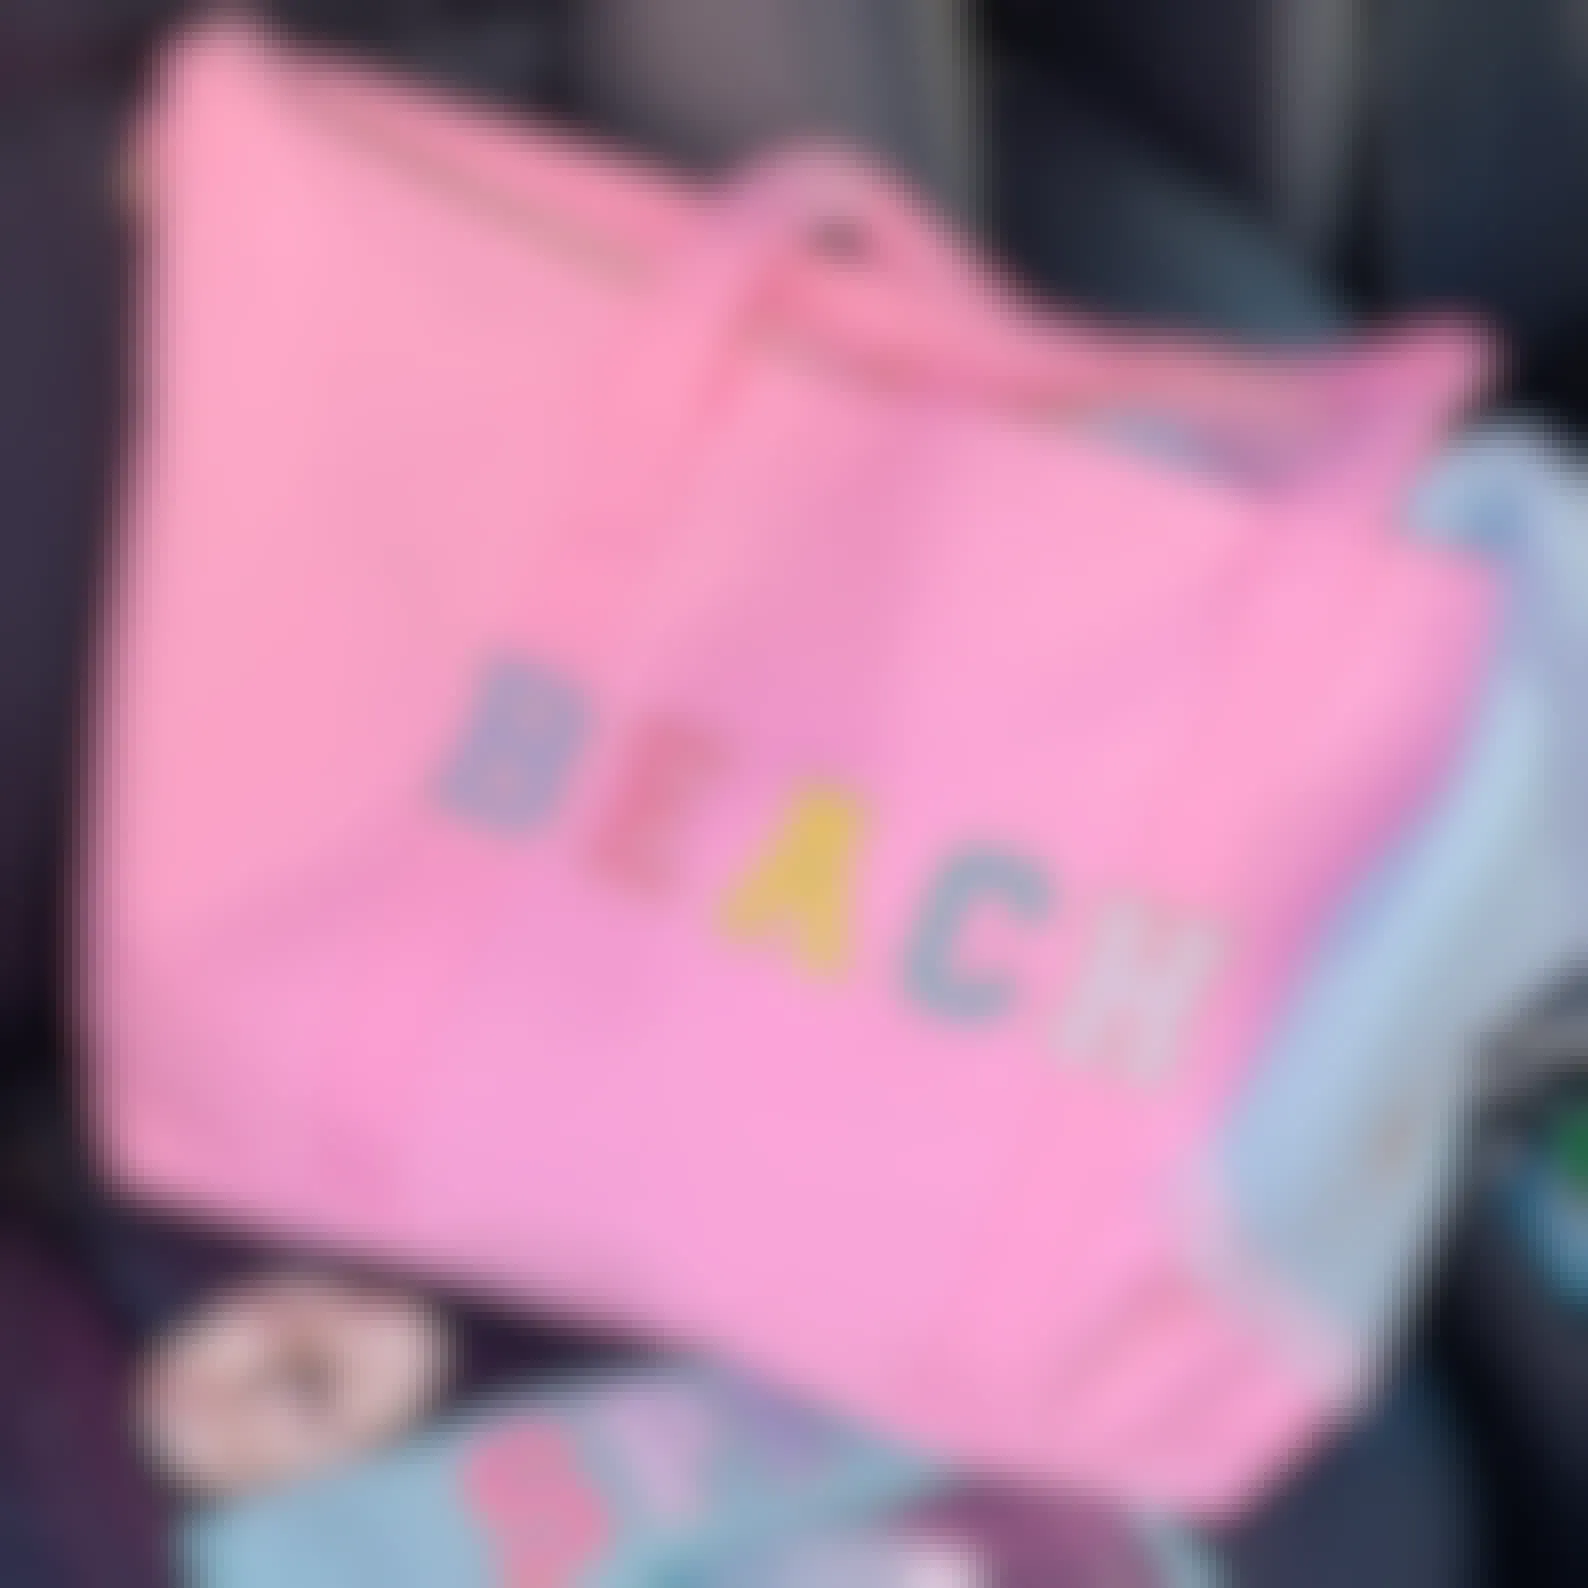 A tote bag that says "Beach" on the front in custom patches sitting in the passenger seat of a vehicle.